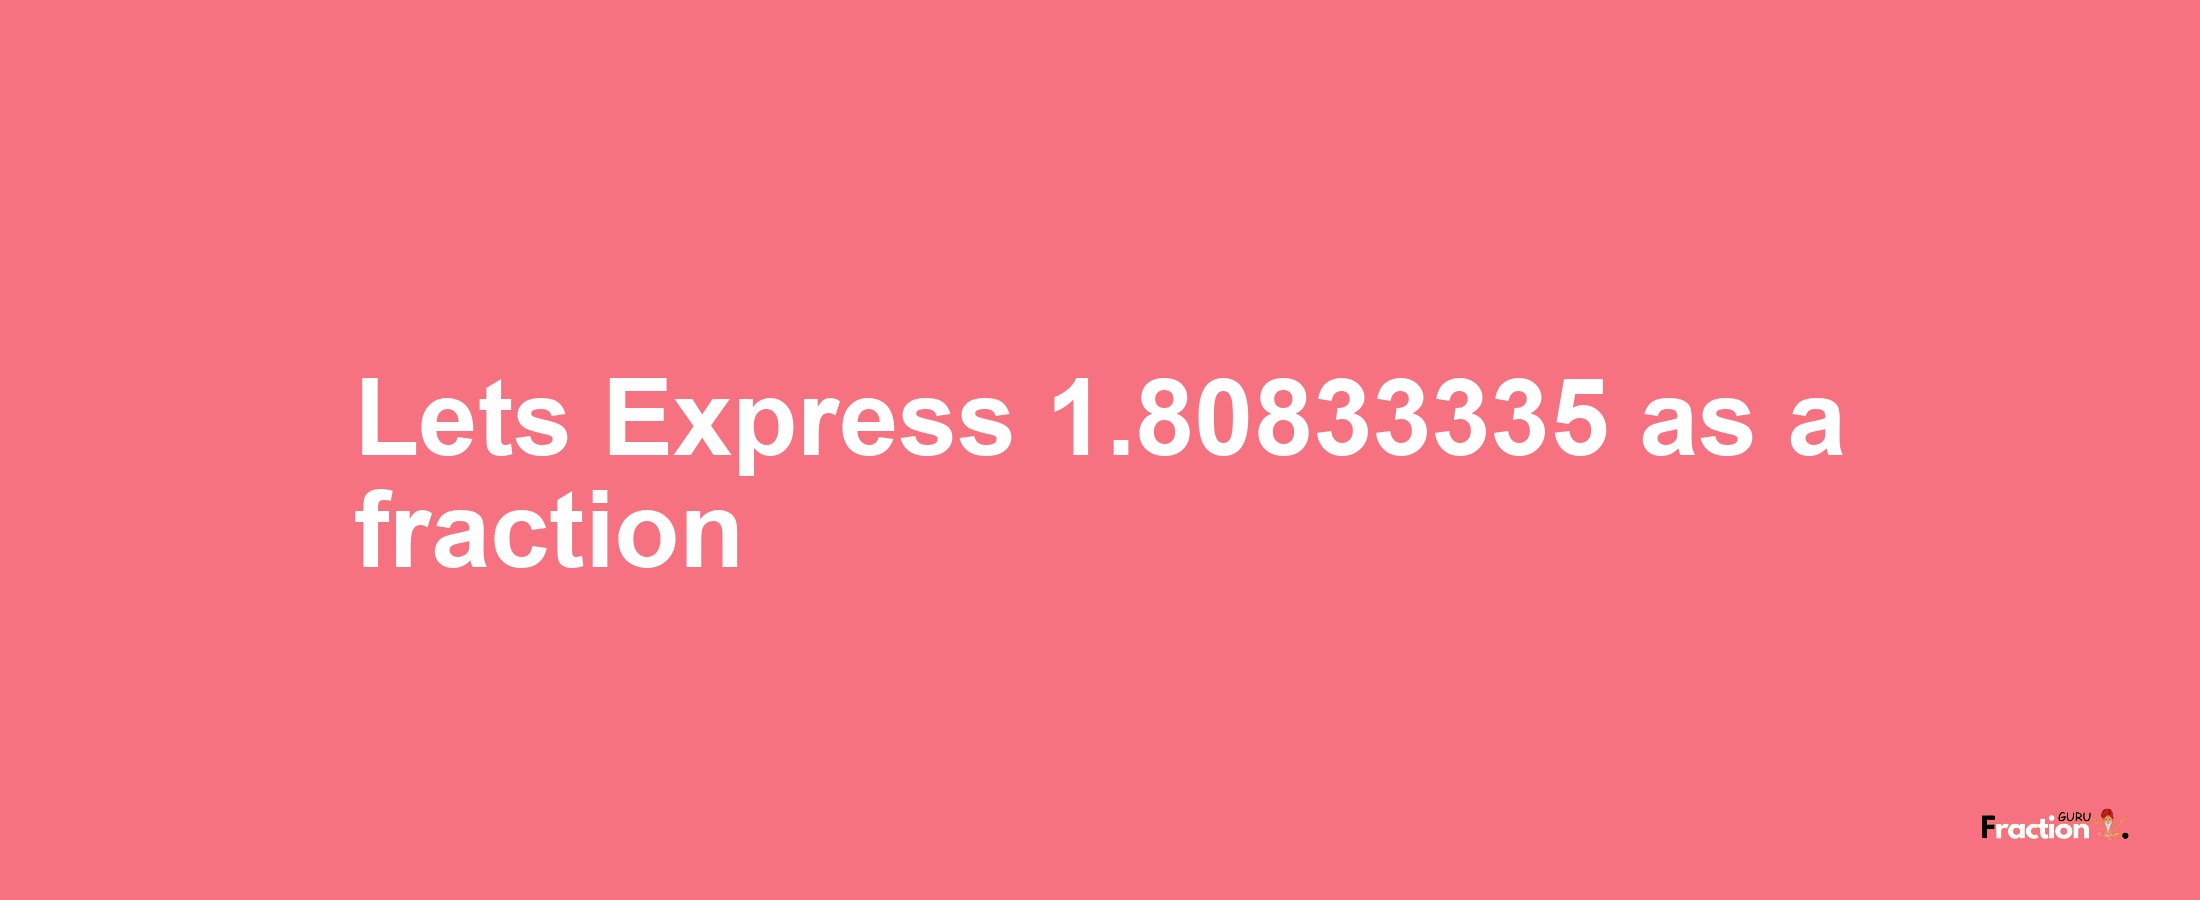 Lets Express 1.80833335 as afraction